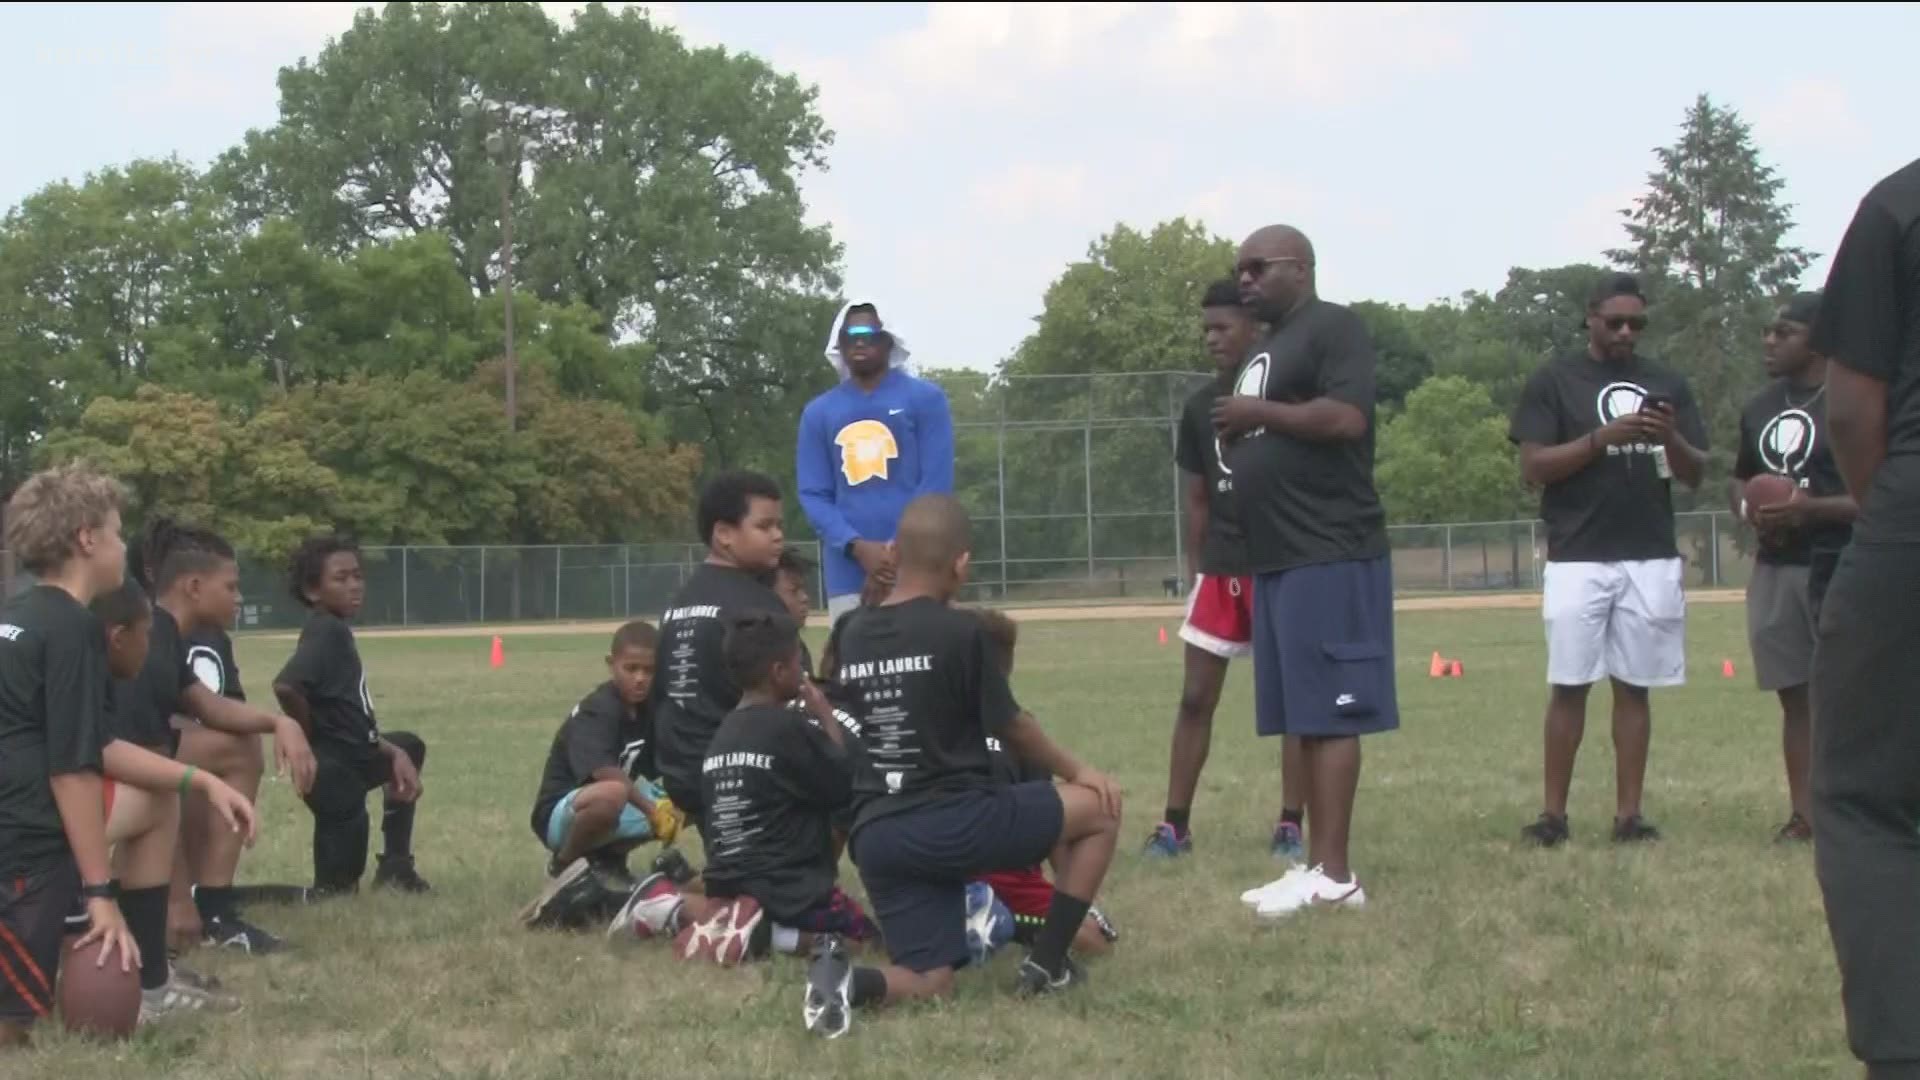 The free camp aimed to give kids football and life skills.